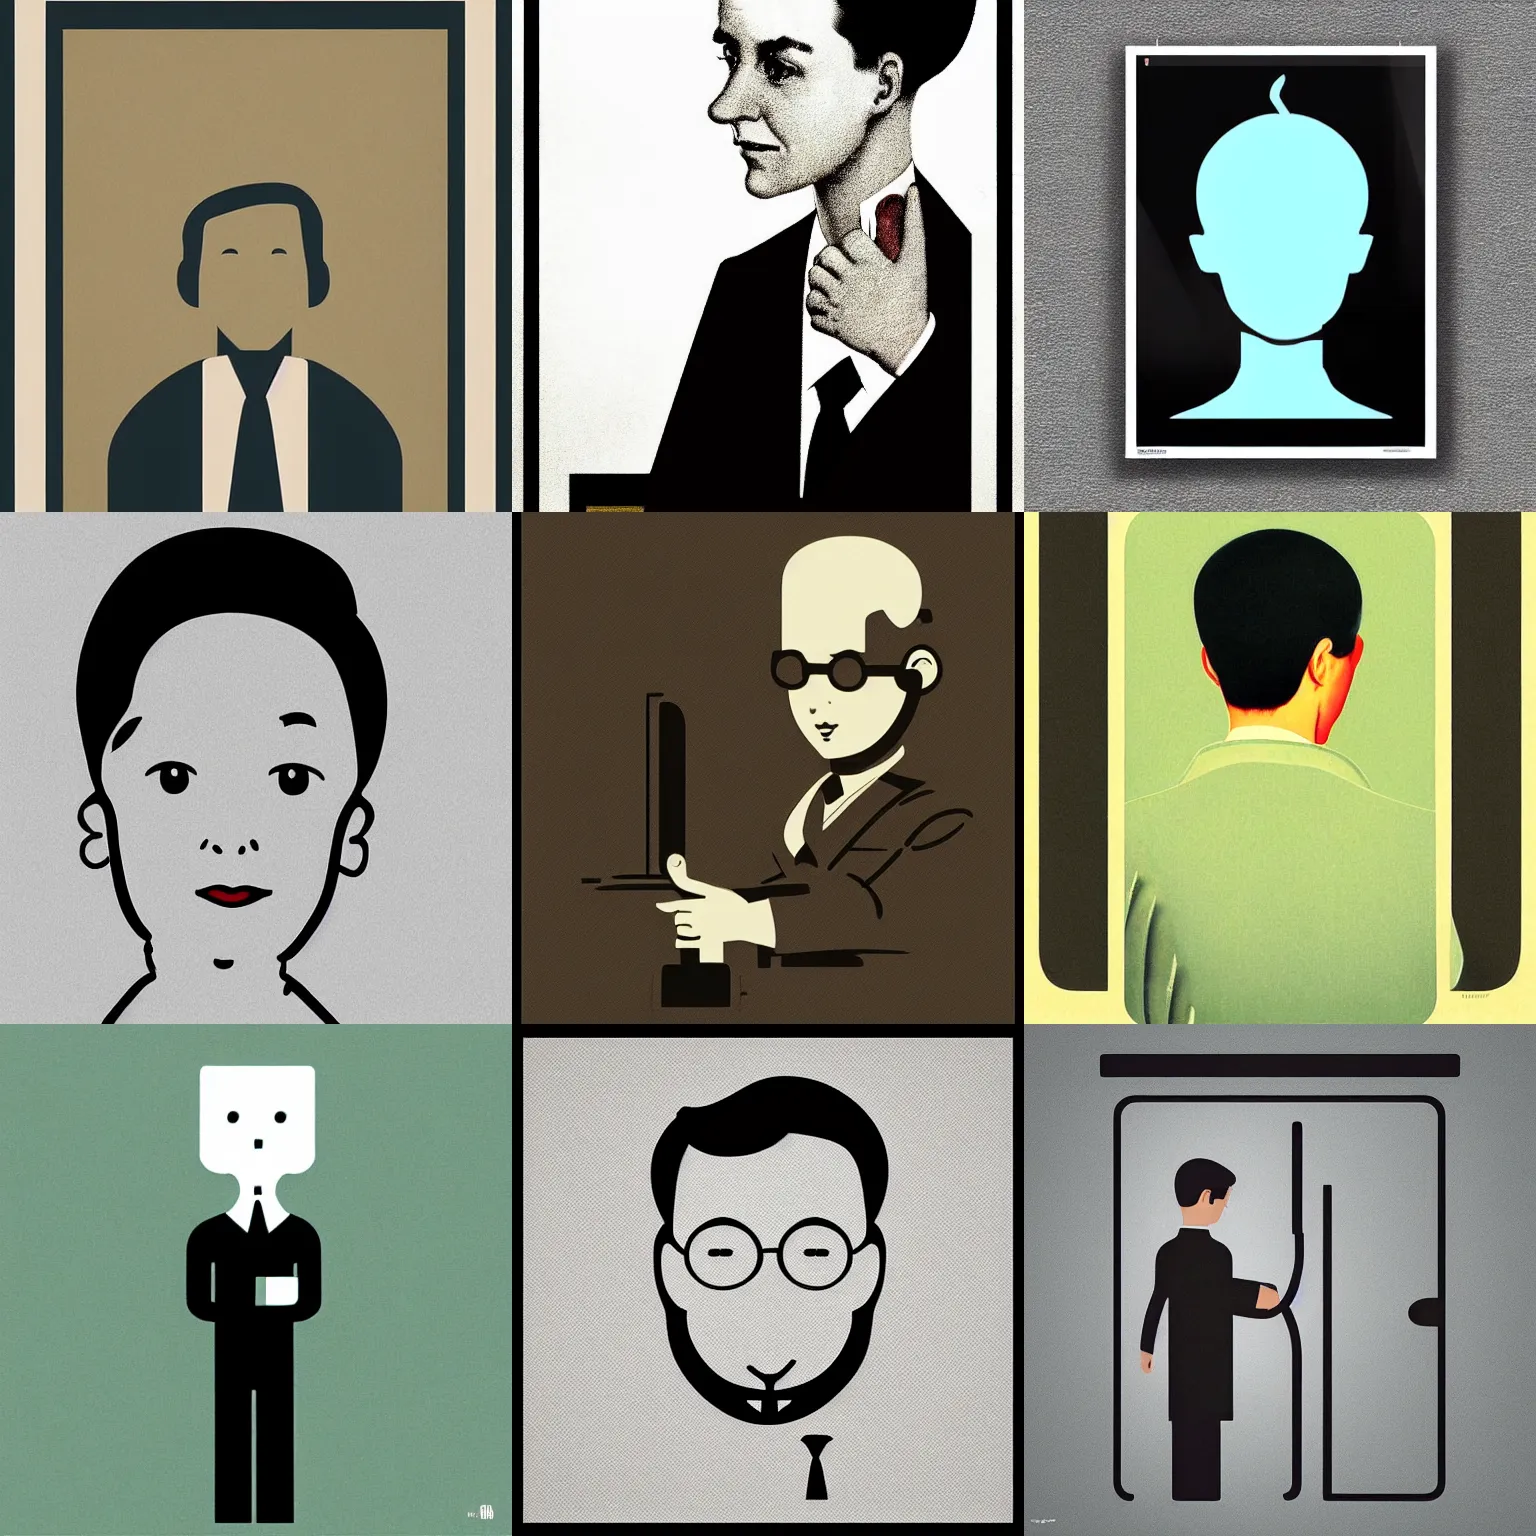 Prompt: icon of office worker stylized minimalist from behance, ios, vintage, magazine illustration, by norman rockwell, william - adolphe bouguereau, pixar, philippe starck, jony ive, dieter rams, henry dreyfuss, naoto fukasawa